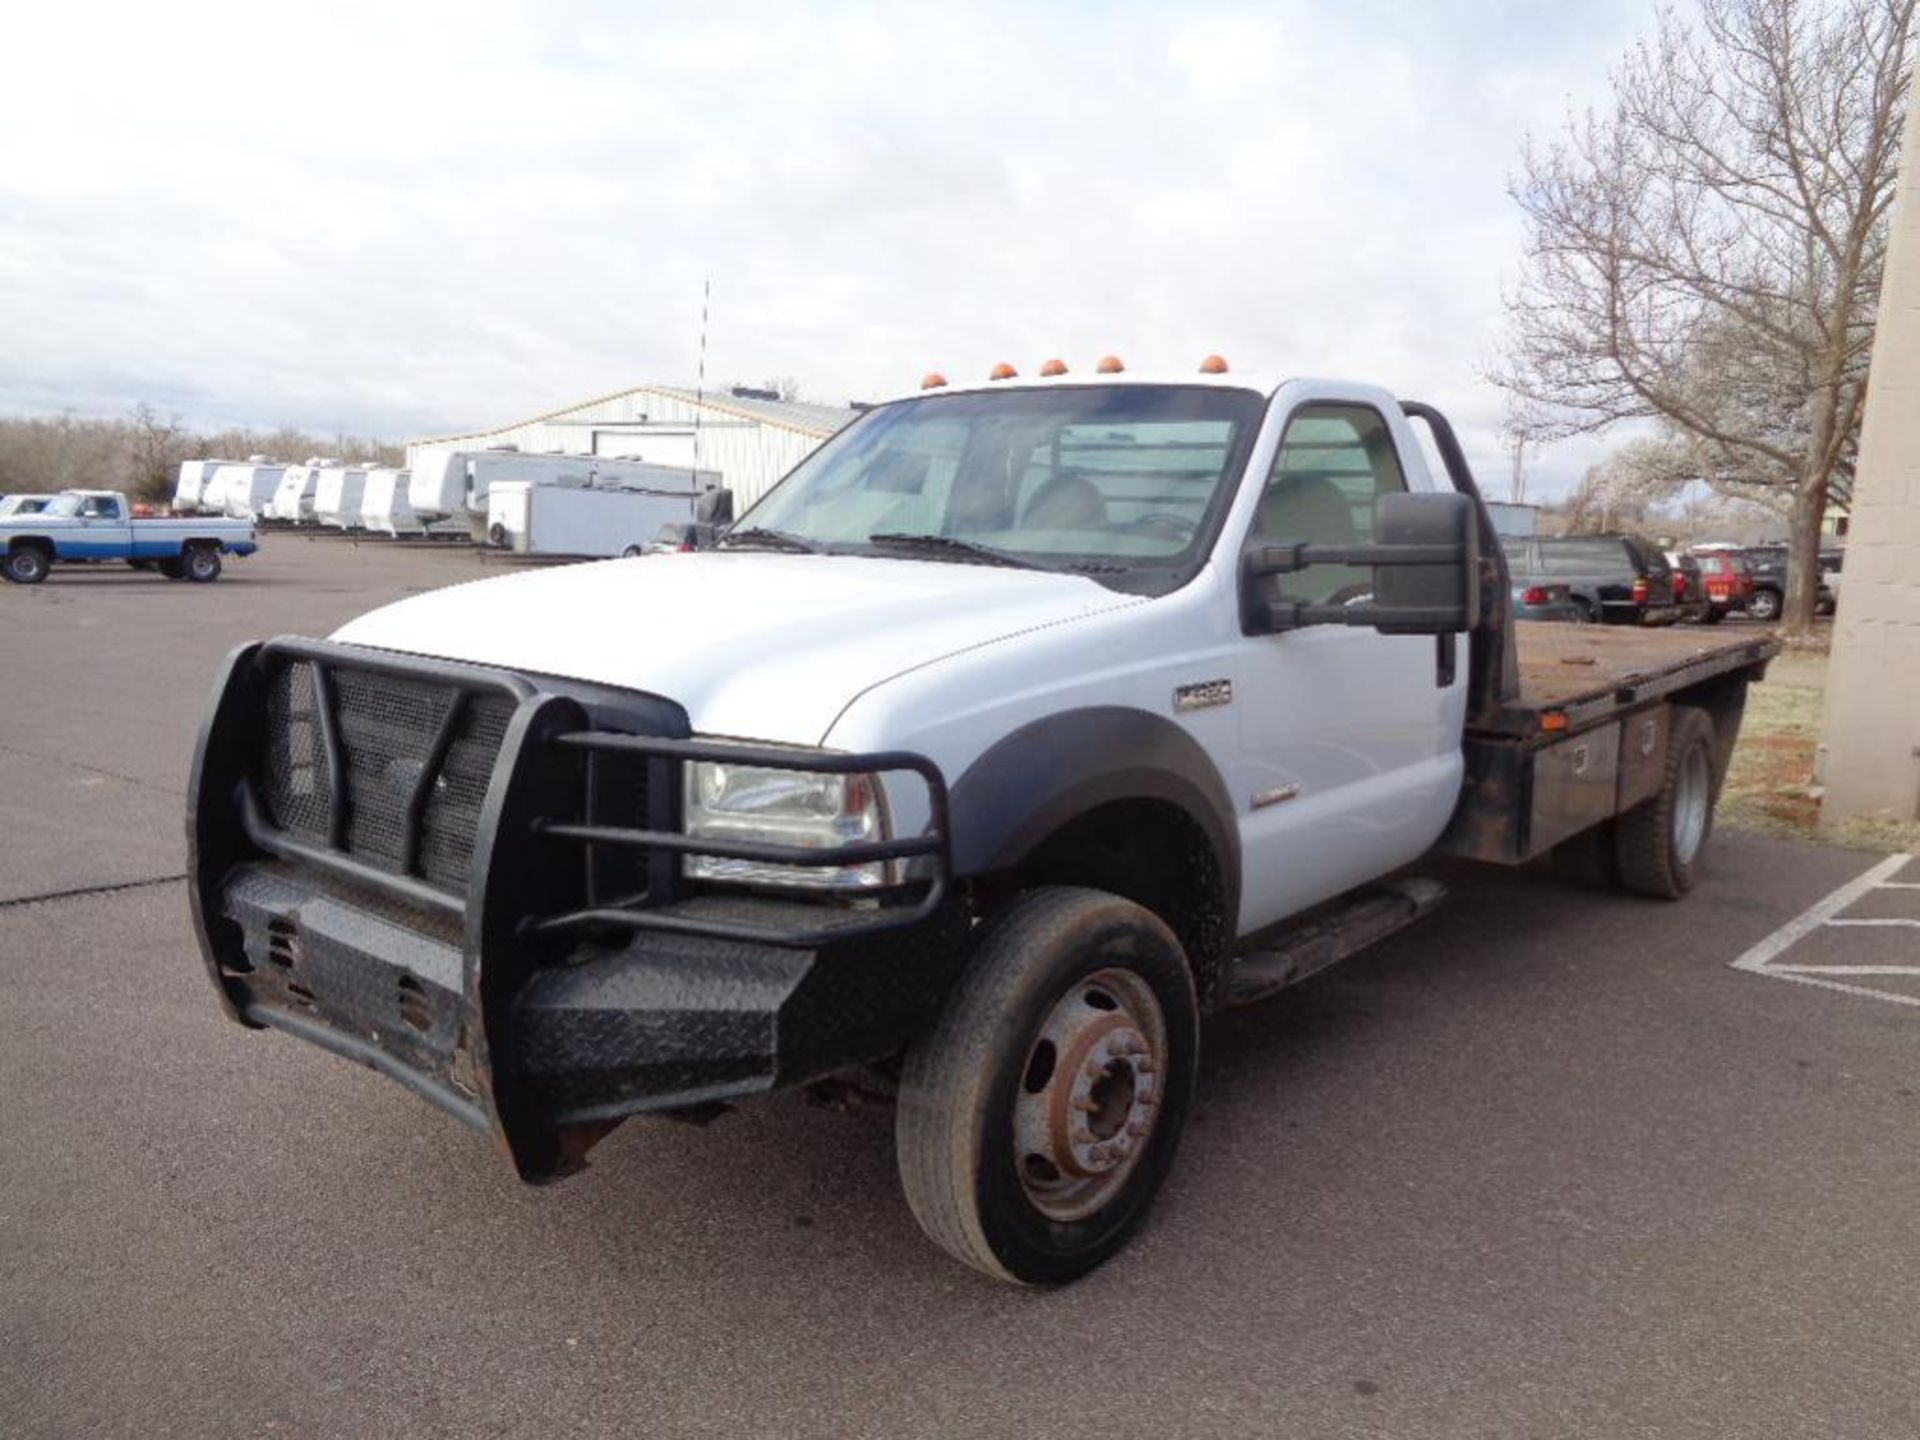 2007 Ford F450 Flatbed Truck s/n 1fdx46p97ea94803, v8 diesel eng, auto trans, od reads 158482 miles